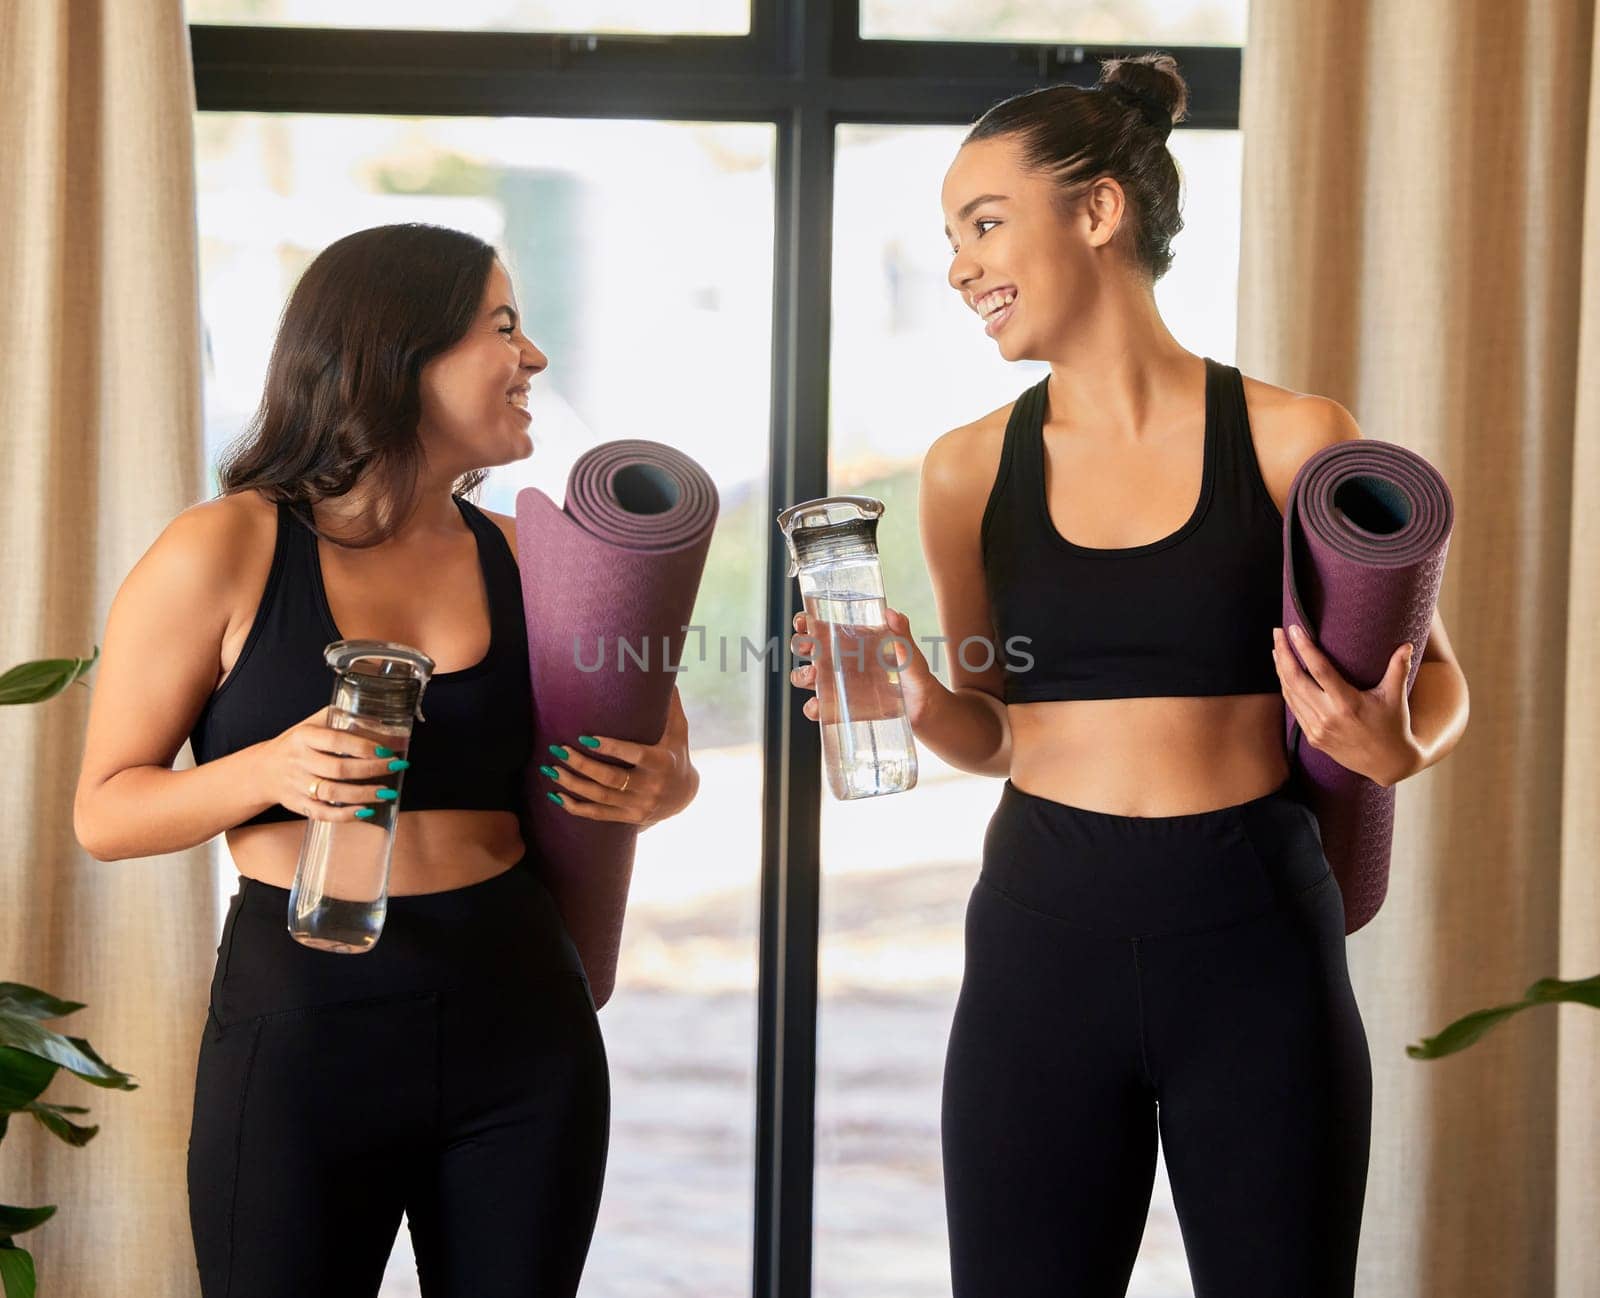 Women or friends talking in yoga class in training gear for fitness, exercise or sports teamwork and wellness. Pilates, meditation and healthy gen z or young people chat of holistic workout together by YuriArcurs